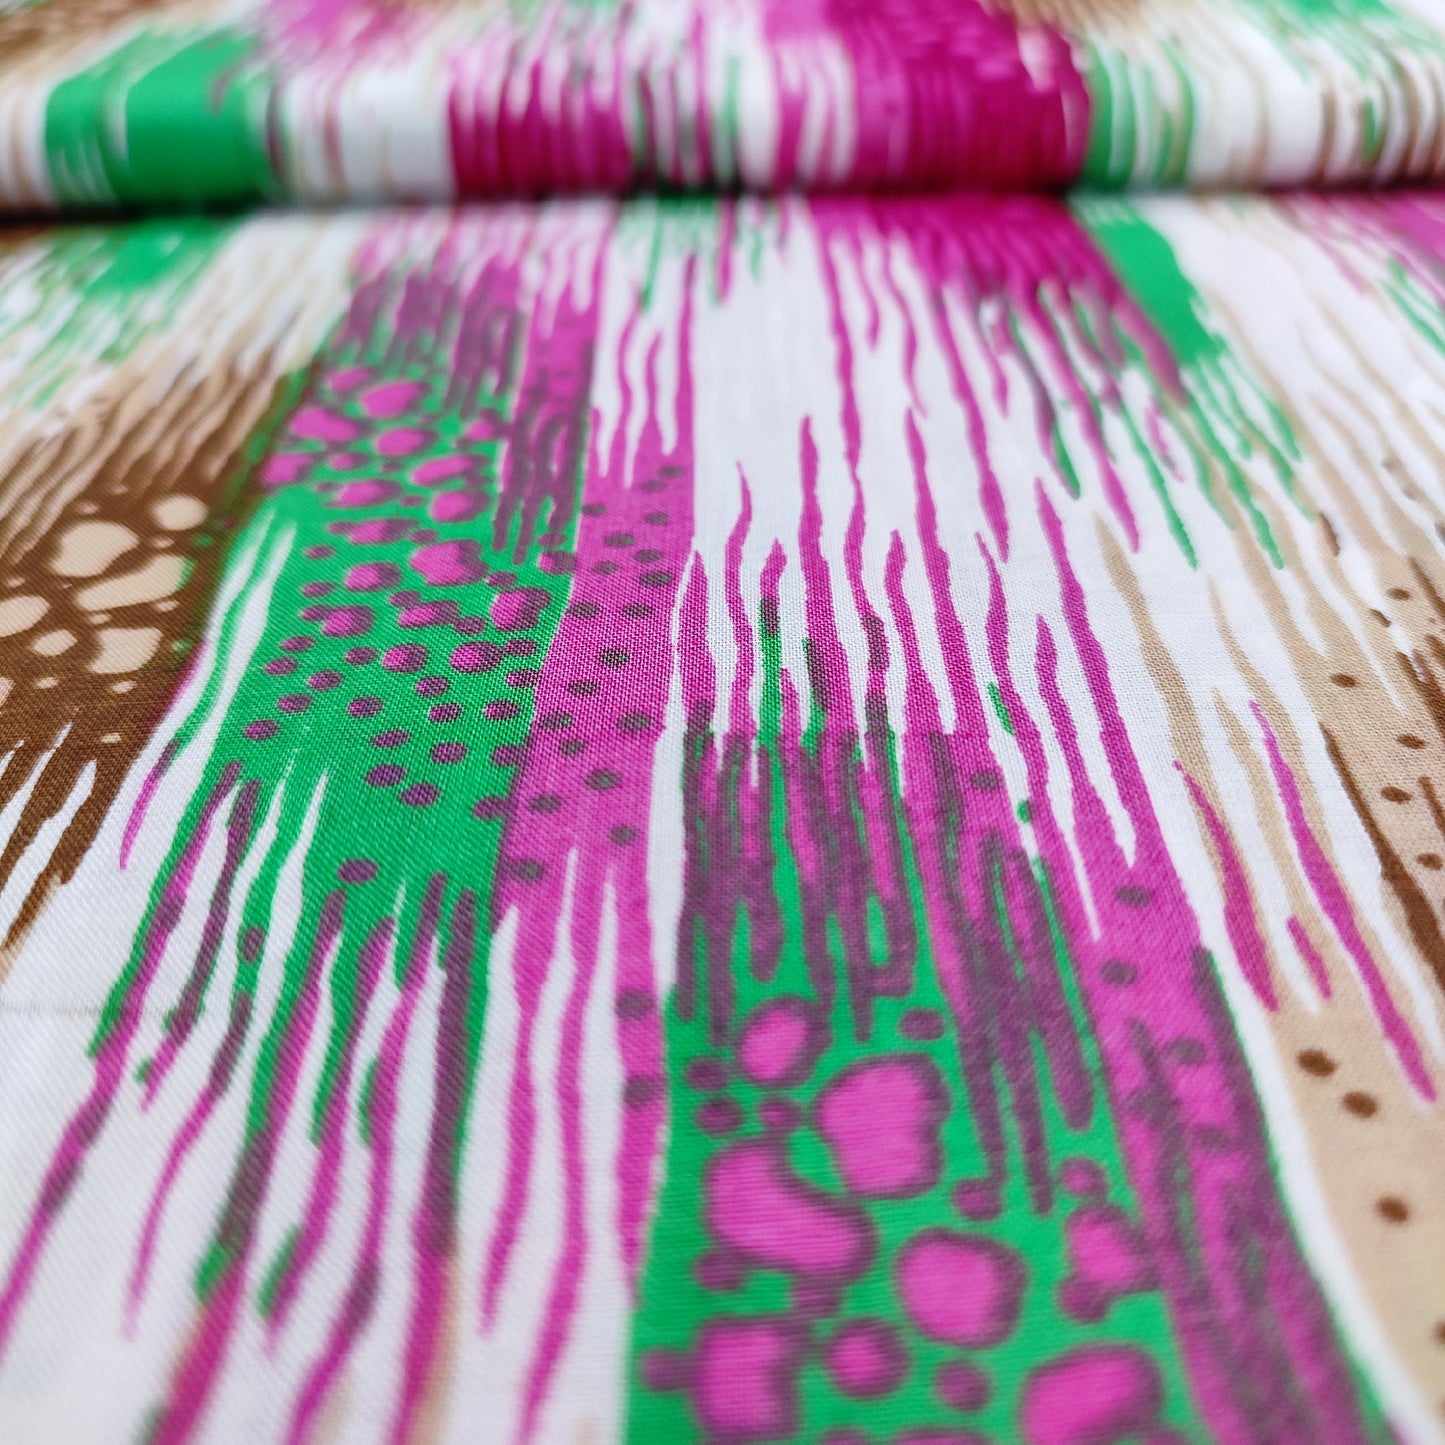 Abstract Colorful Printed Cotton